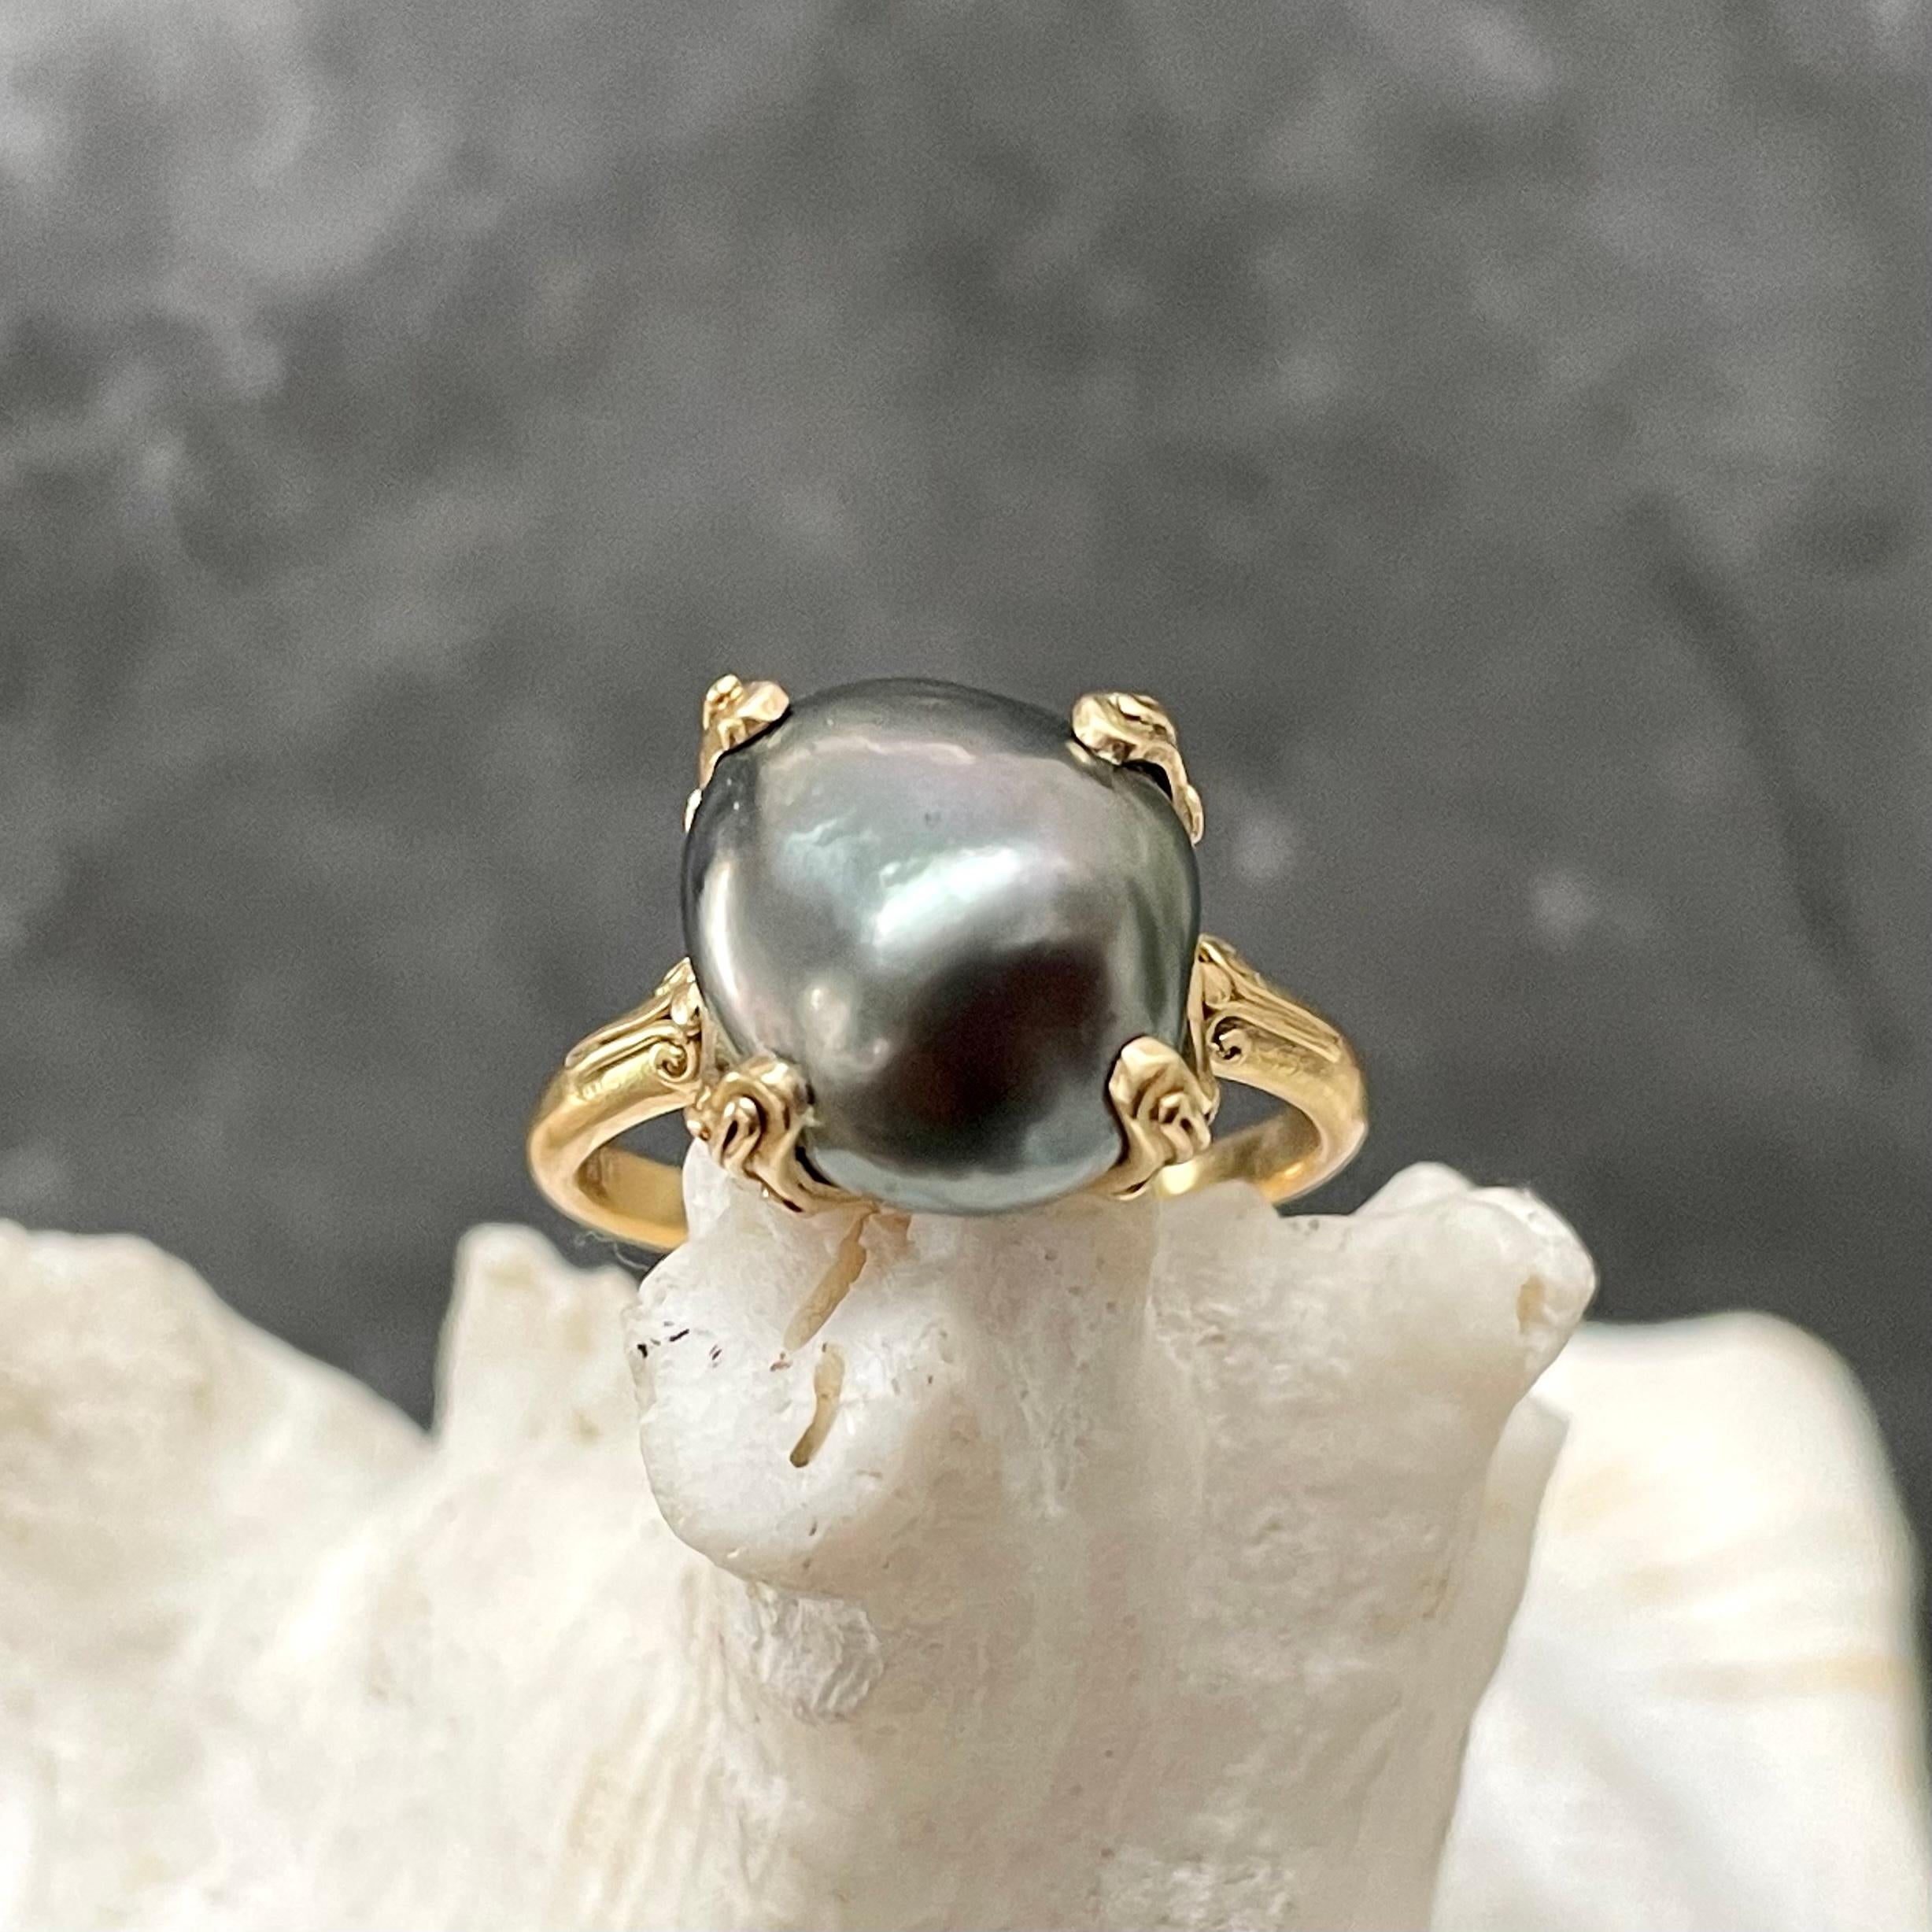 Steven Battelle 6.8 Carat Black South Sea Pearl Ring 18K Gold In New Condition For Sale In Soquel, CA